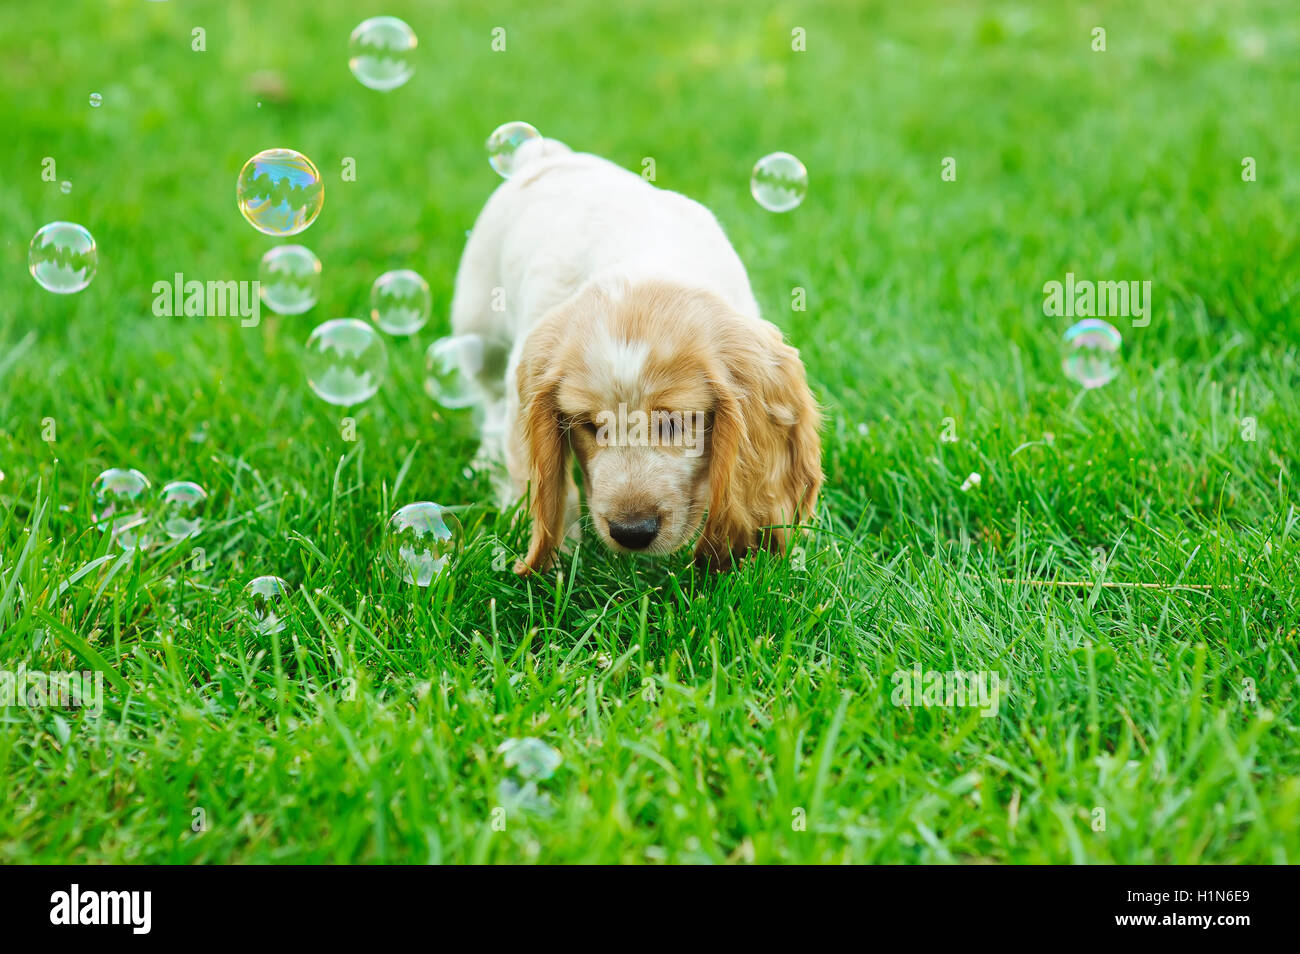 Puppy American Cocker Spaniel standing on a green lawn. Puppy playing with soap bubbles. Stock Photo